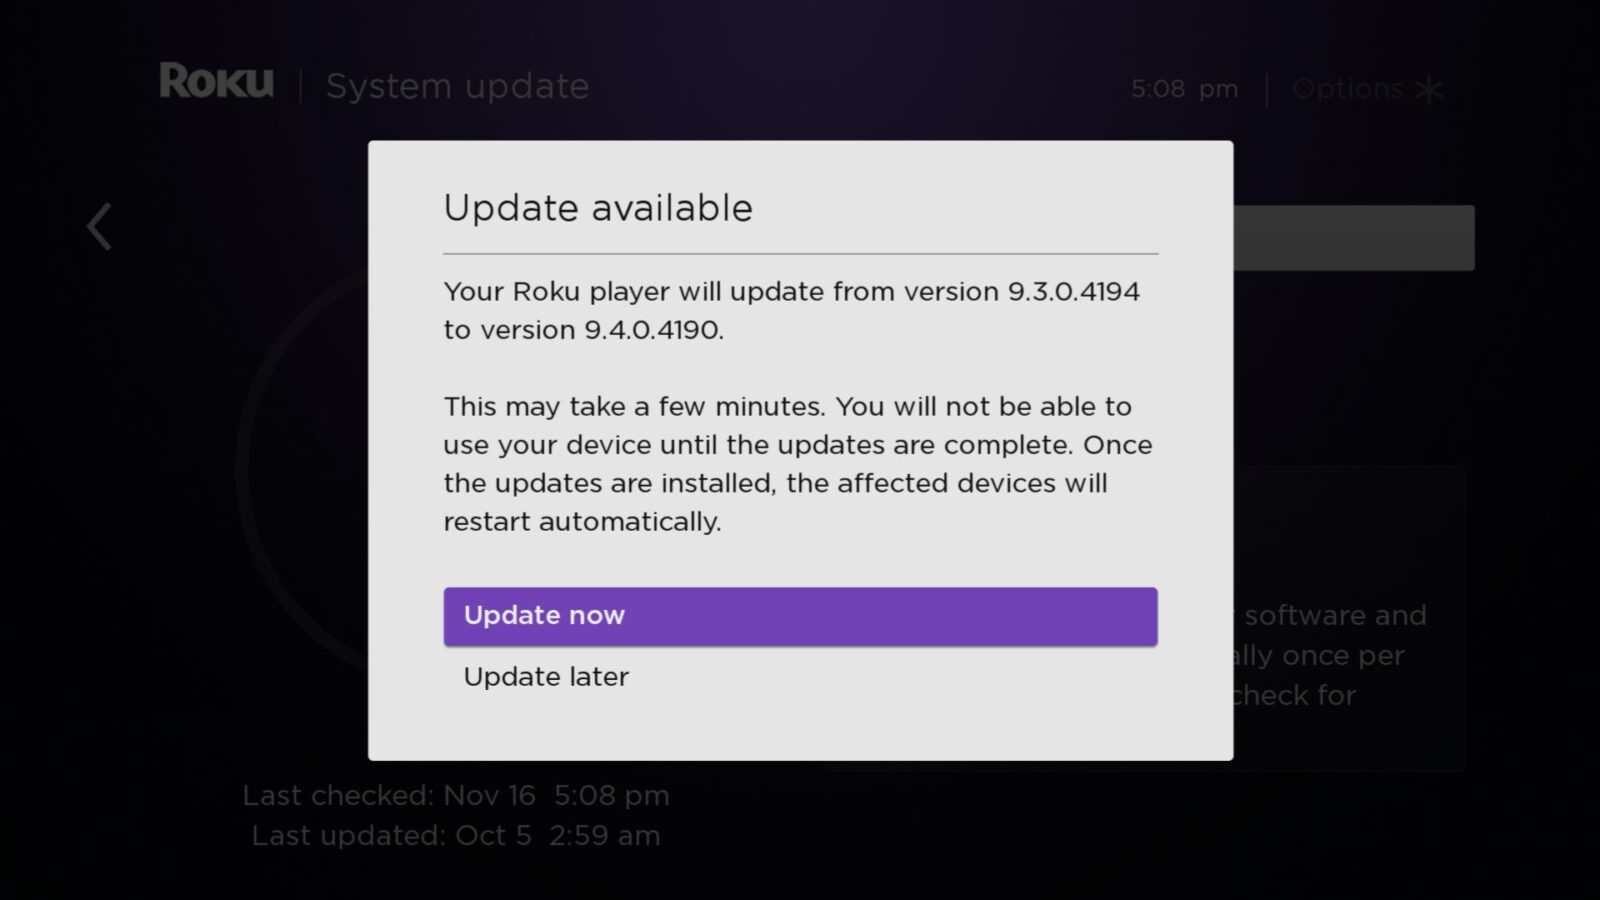 How to Update Roku Manually